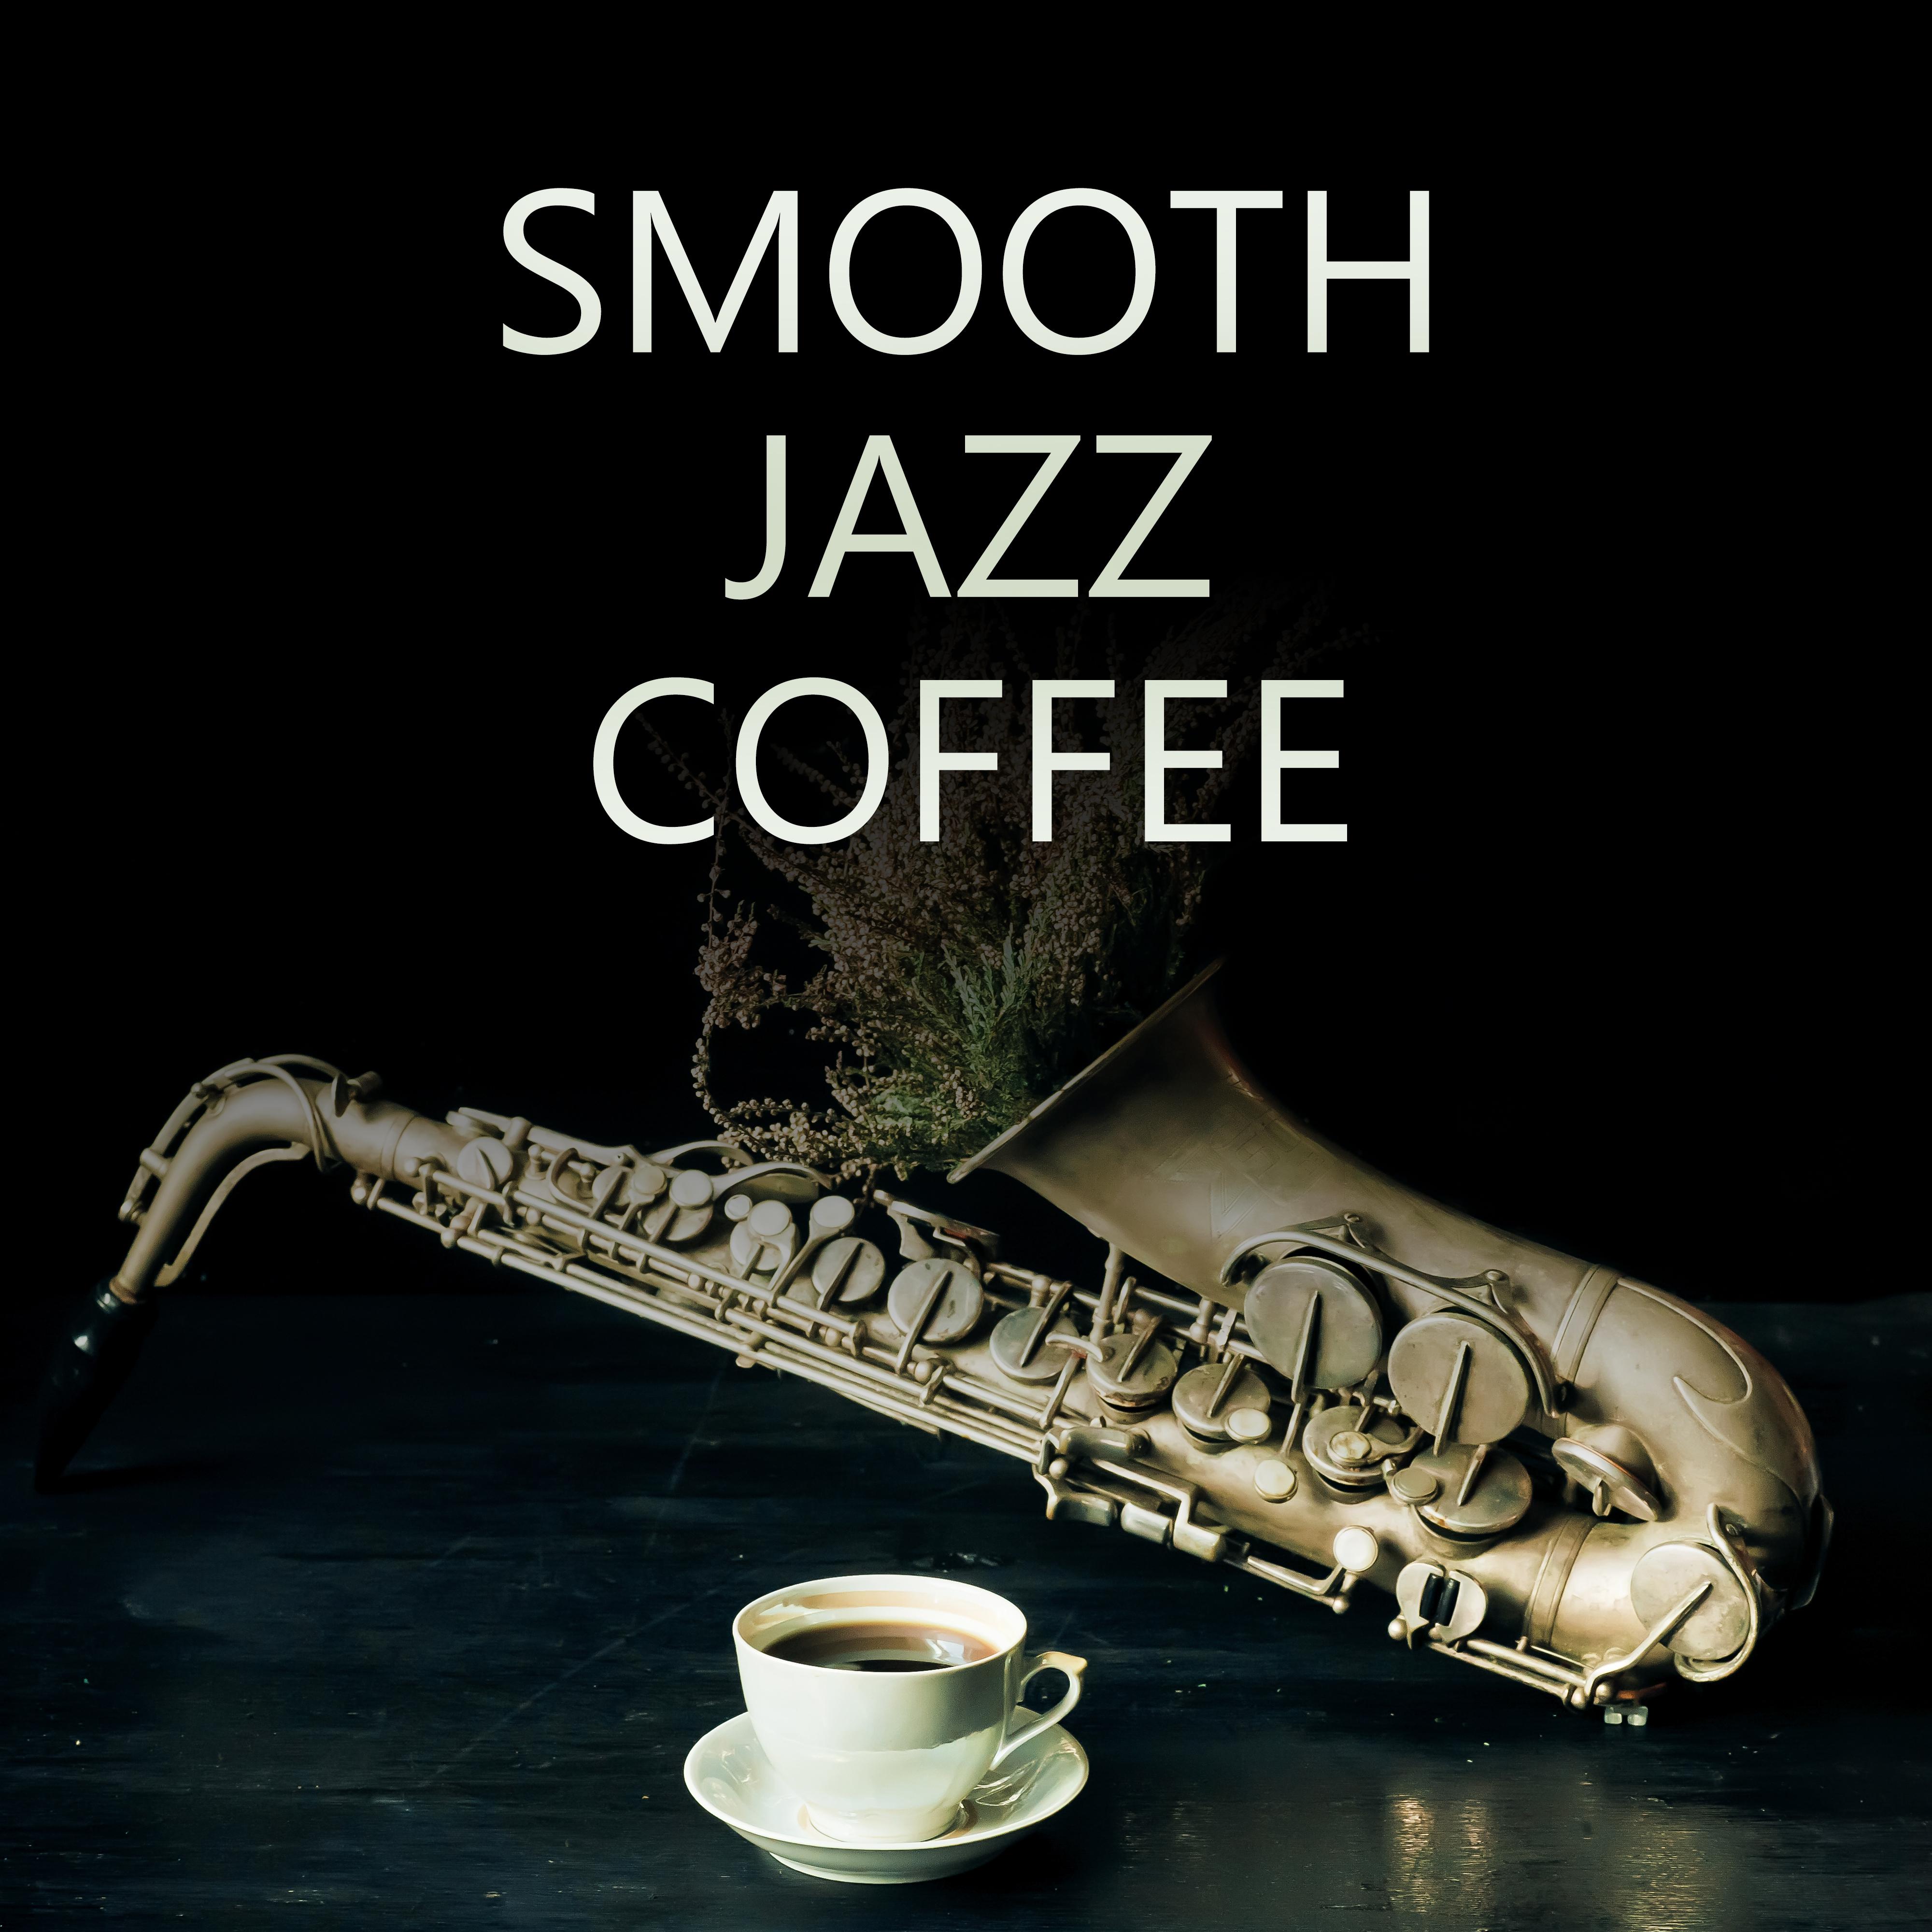 Smooth Jazz Coffee  Instrumental Songs for Relaxation, Restaurant, Cafe, Mellow Jazz 2019, Relax Zone